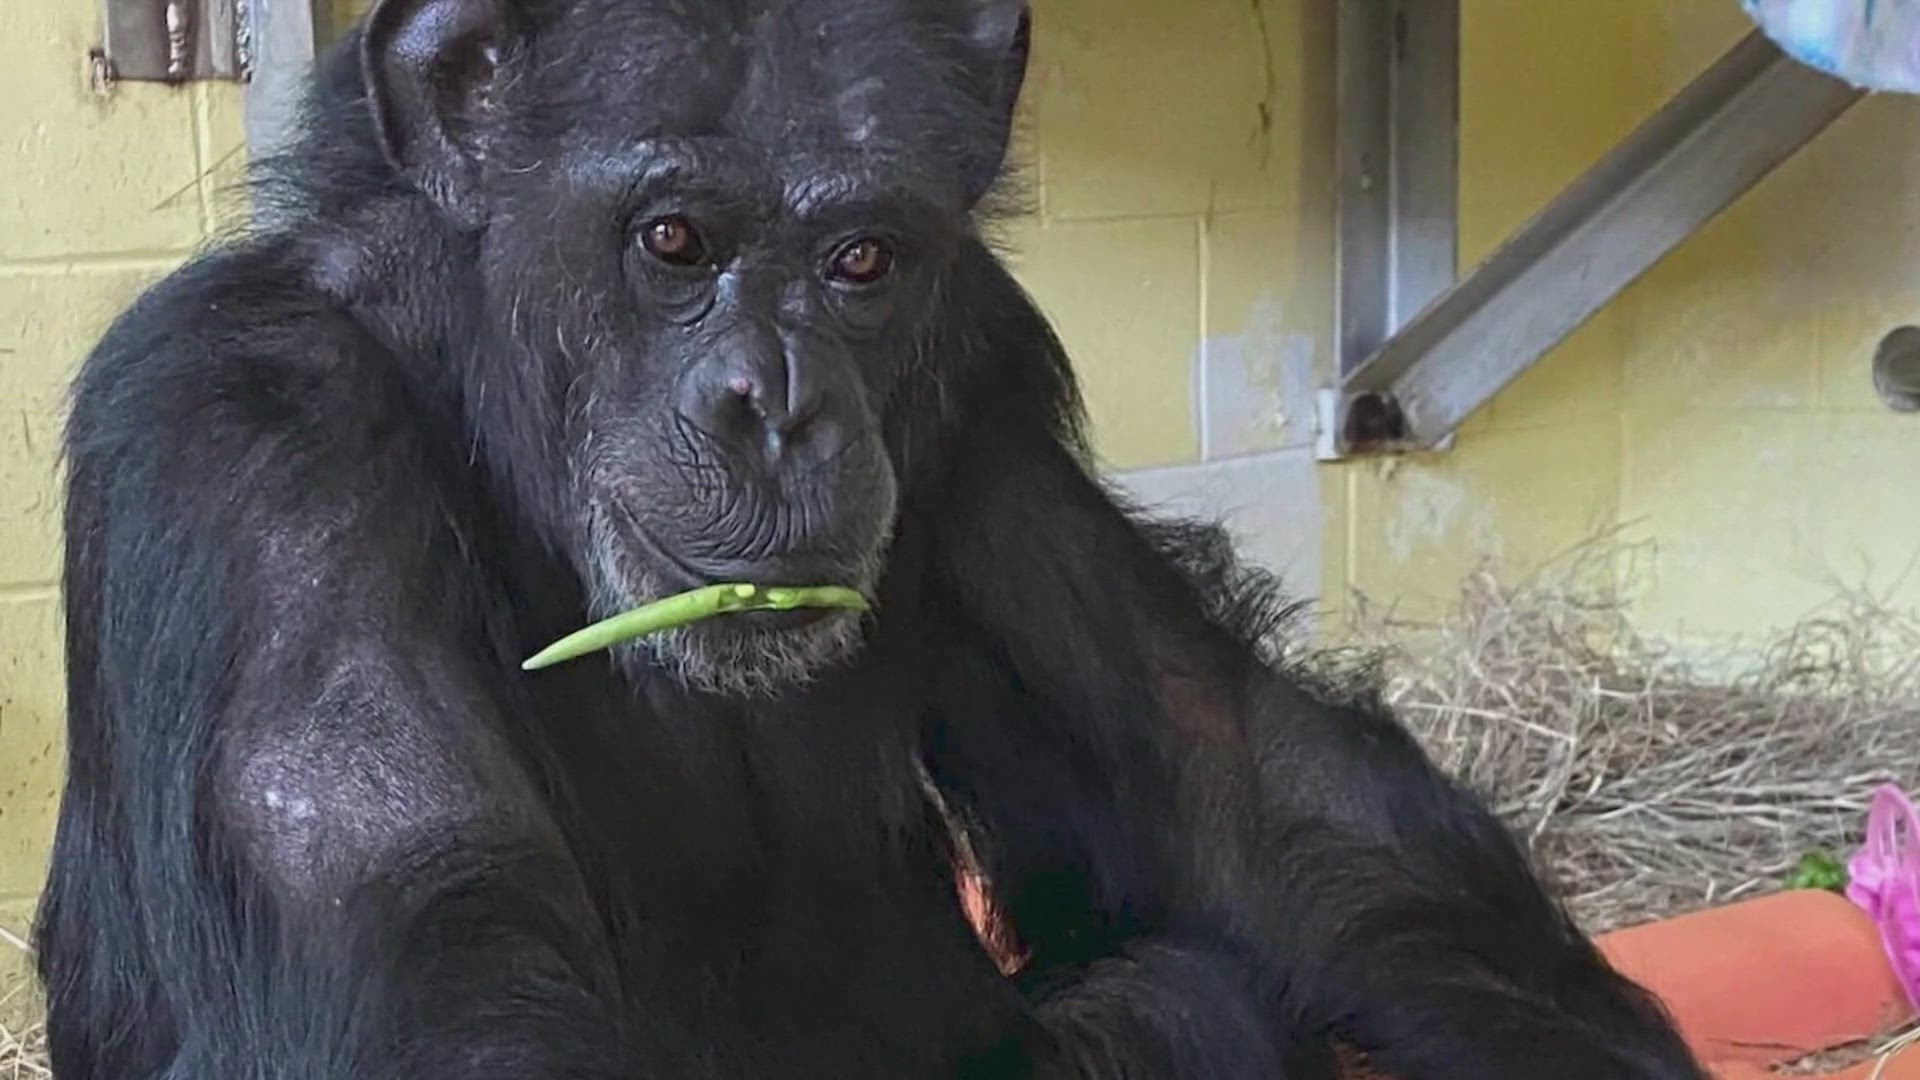 A video of Vanilla went viral last year, showing her see the open sky for the first time in decades. Now we're getting a look at the facility that rescued her.